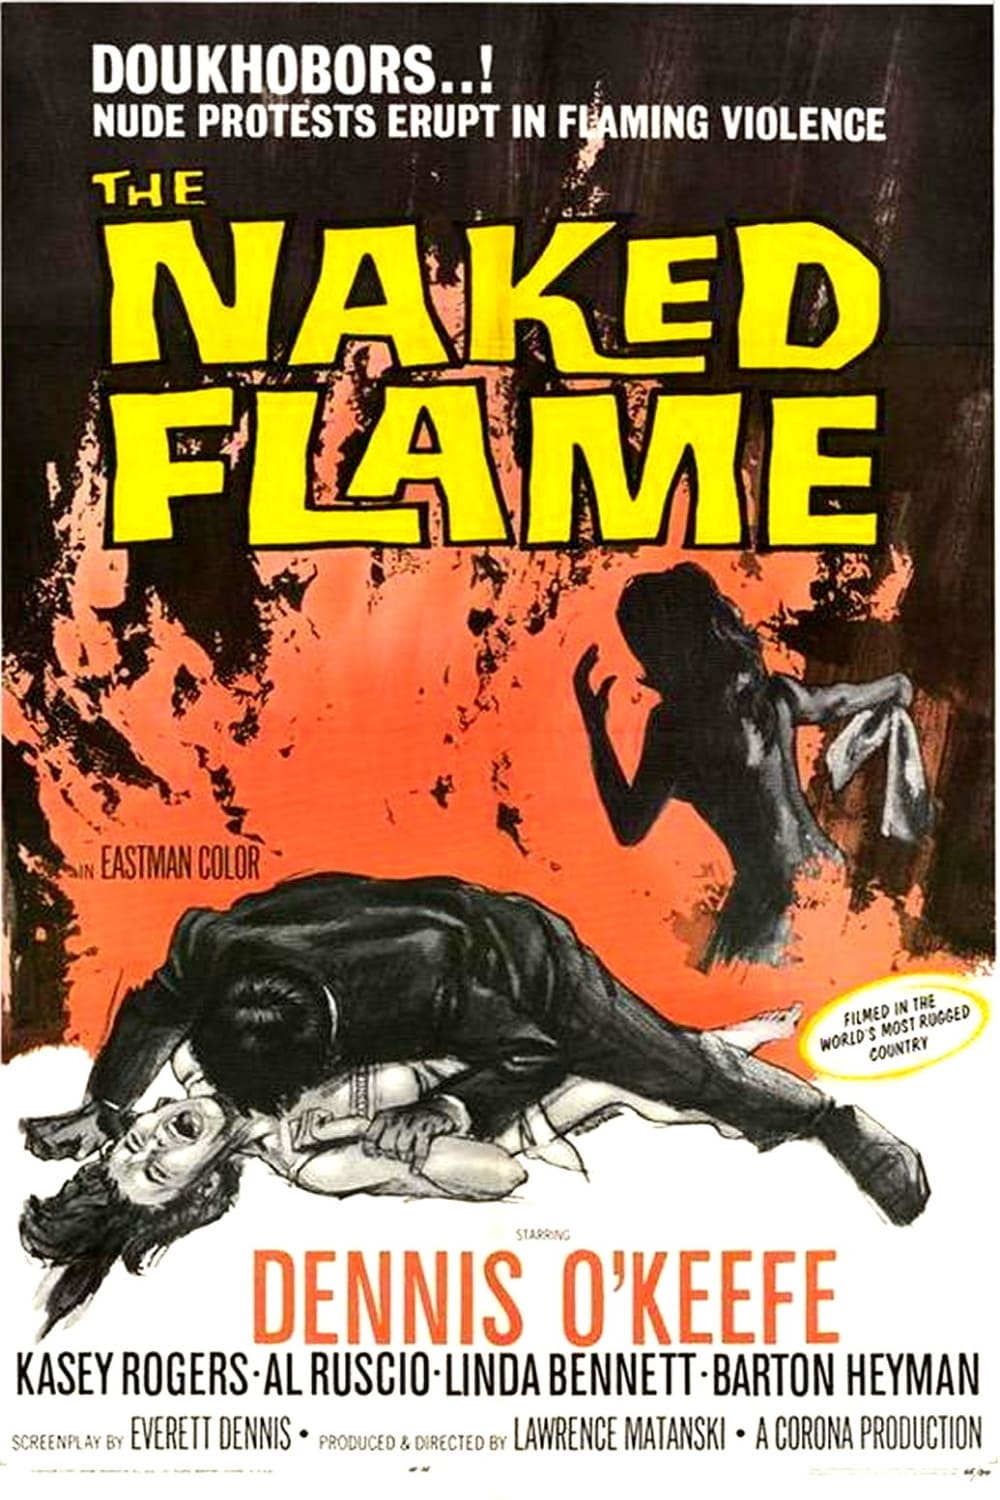 The Naked Flame